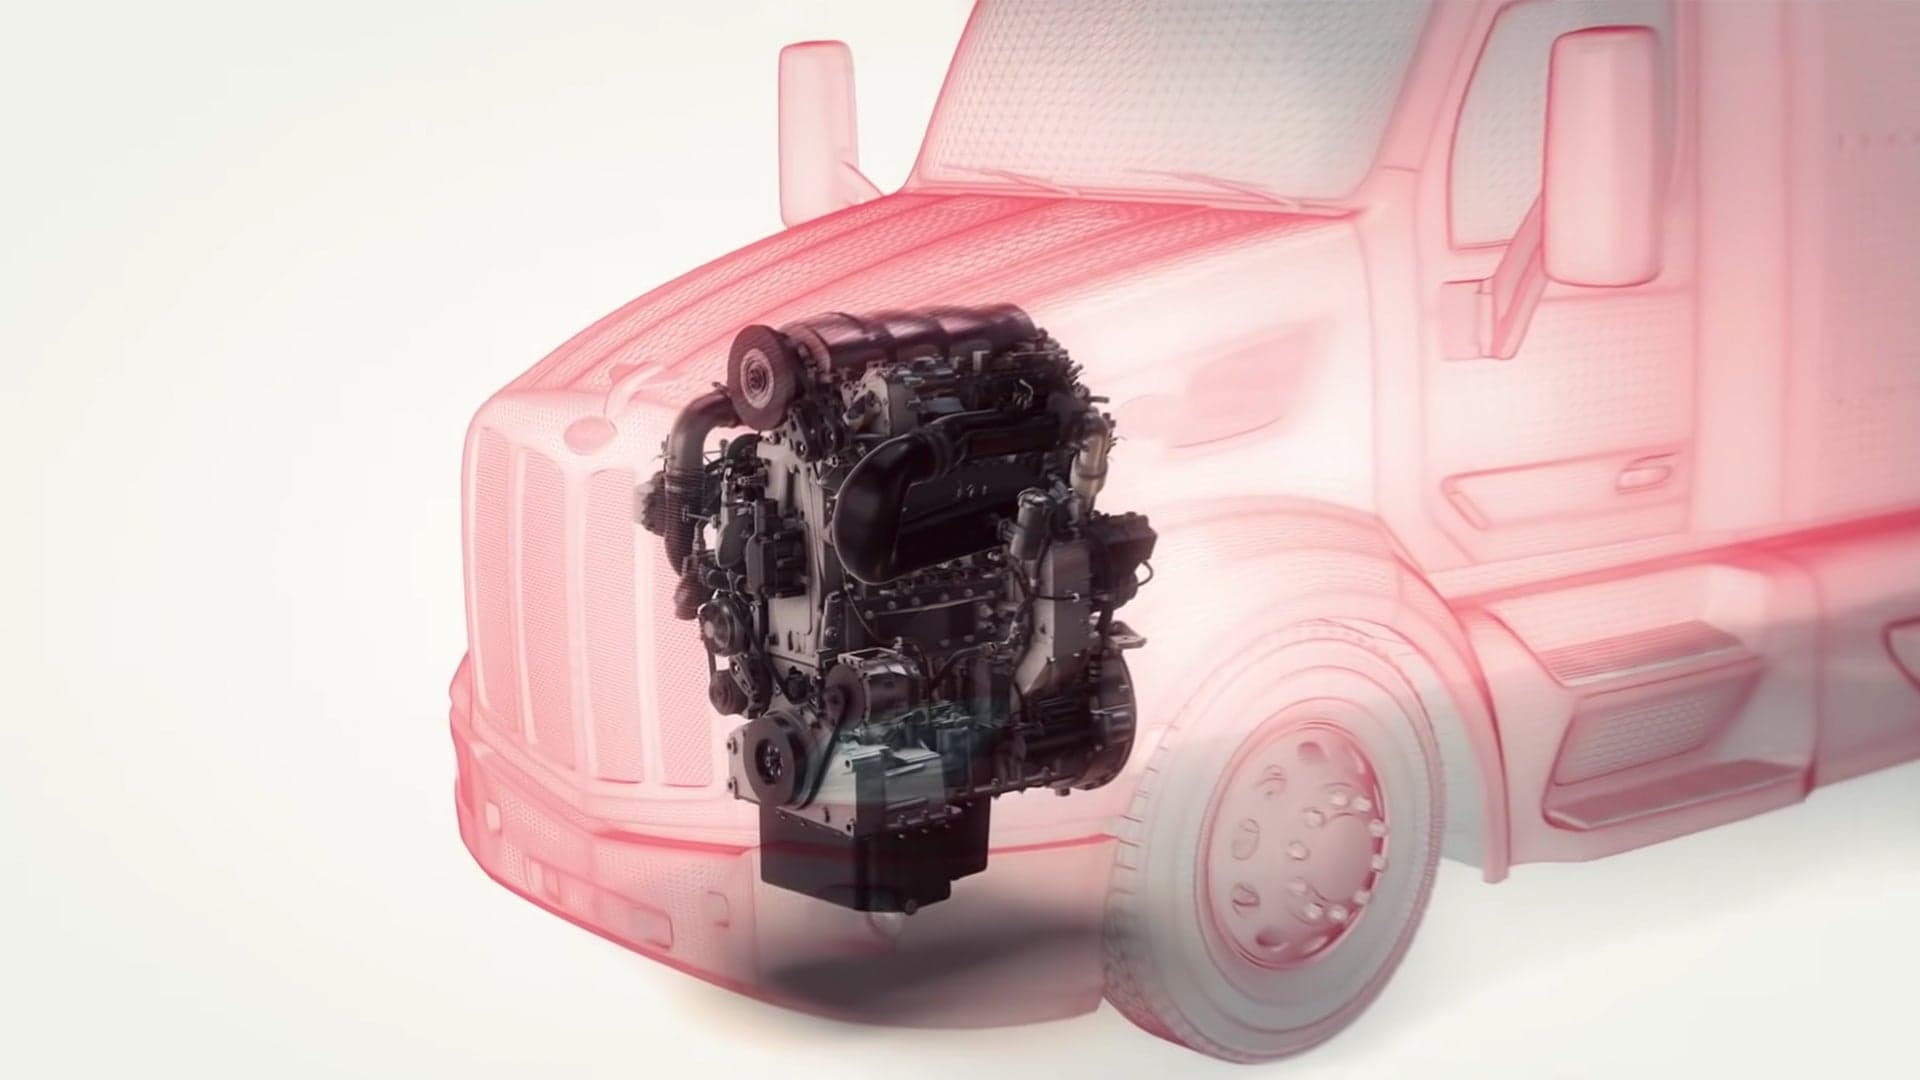 This 10.6L, Three-Cylinder Diesel Truck Engine Beats Emission Targets, Could Run On Hydrogen